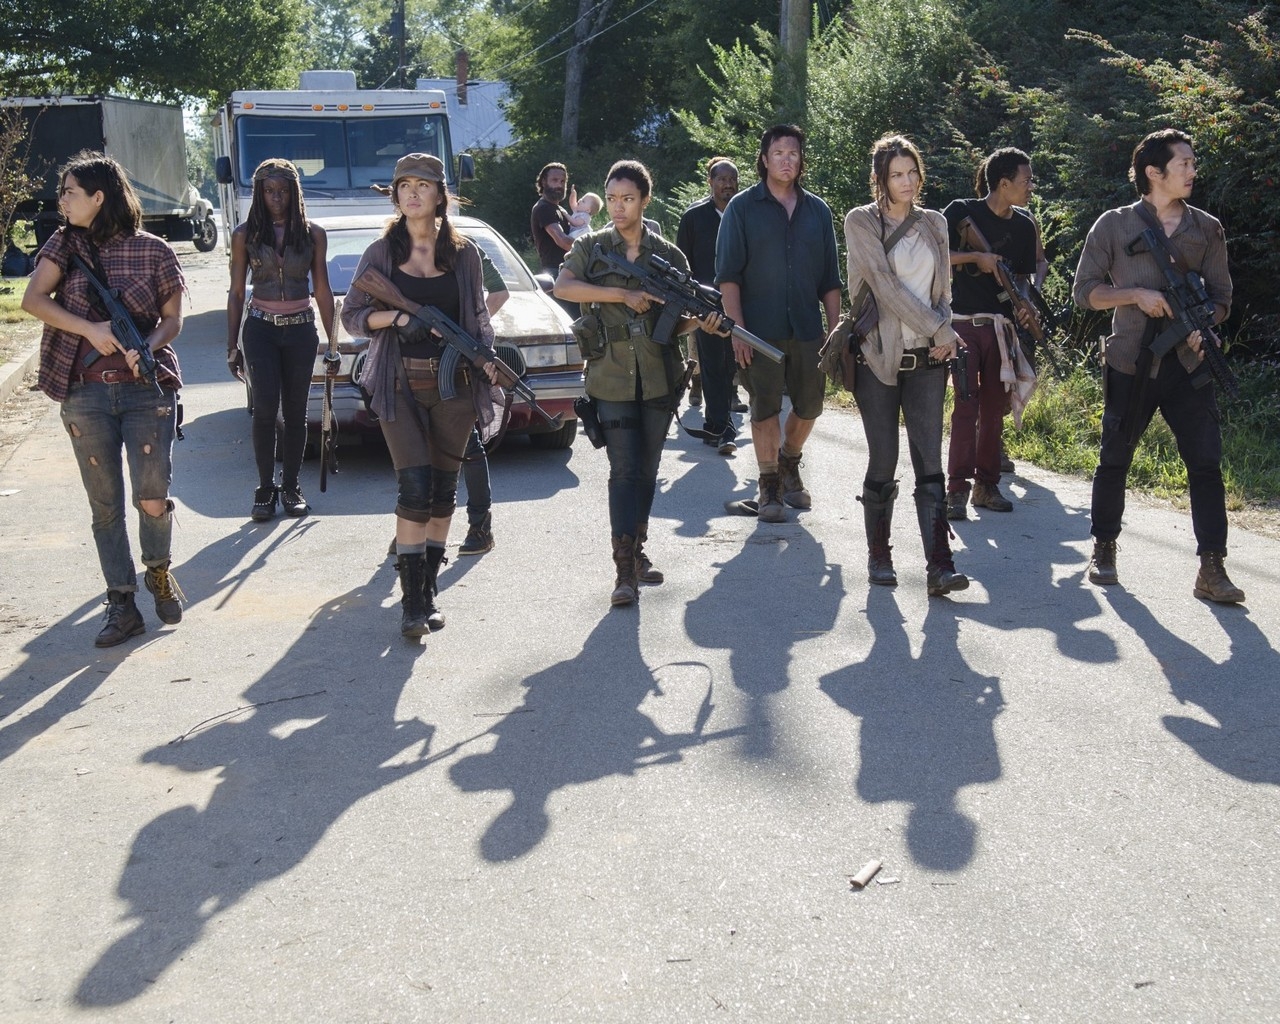 The Walking Dead Hunting for 1280 x 1024 resolution